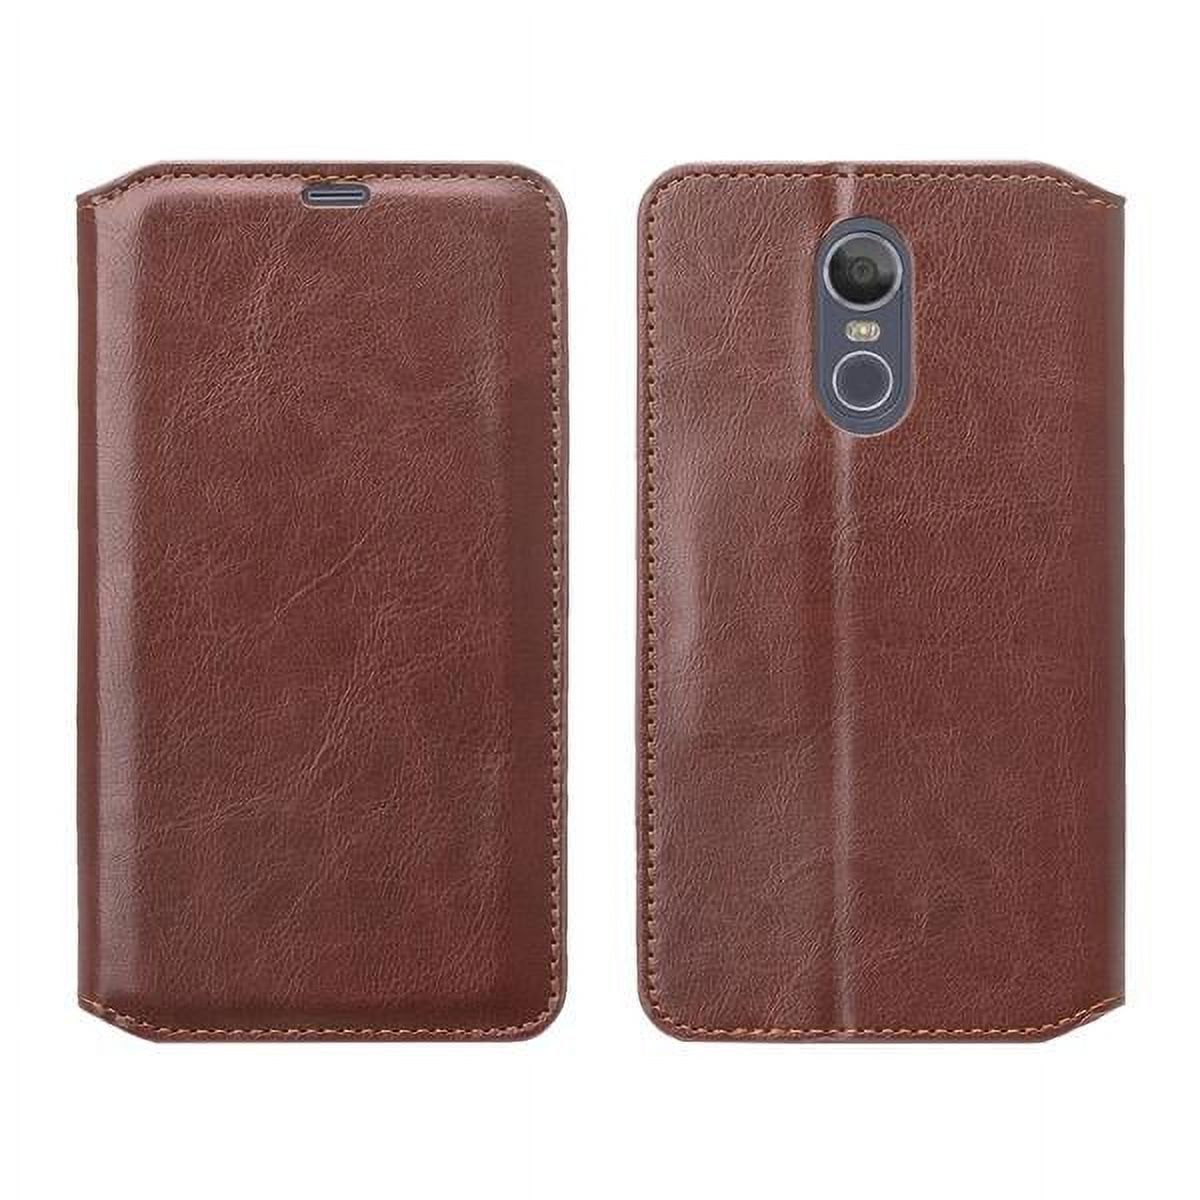 LG Stylo4 Case, LG Stylus4 Case, Slim Folio [Kickstand] Pu Leather Wallet Case Phone Case for LG Stylo4 - Brown - image 3 of 6